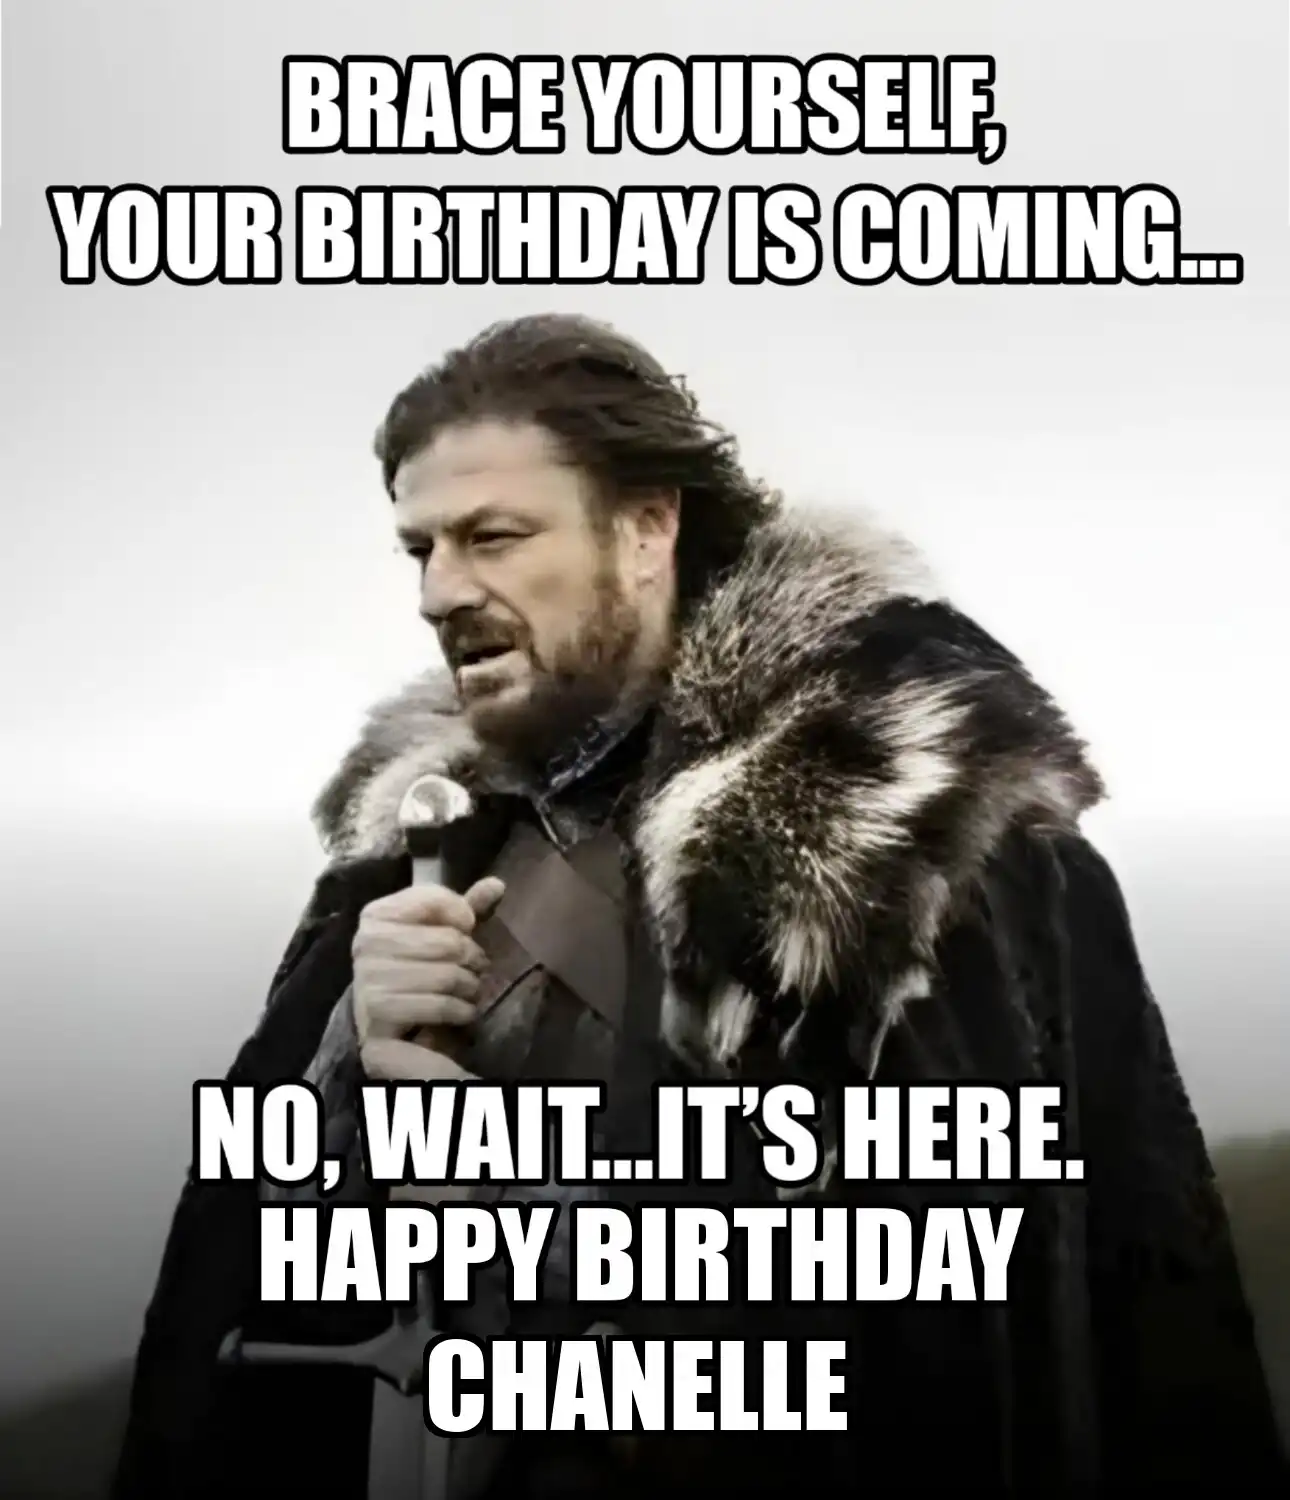 Happy Birthday Chanelle Brace Yourself Your Birthday Is Coming Meme